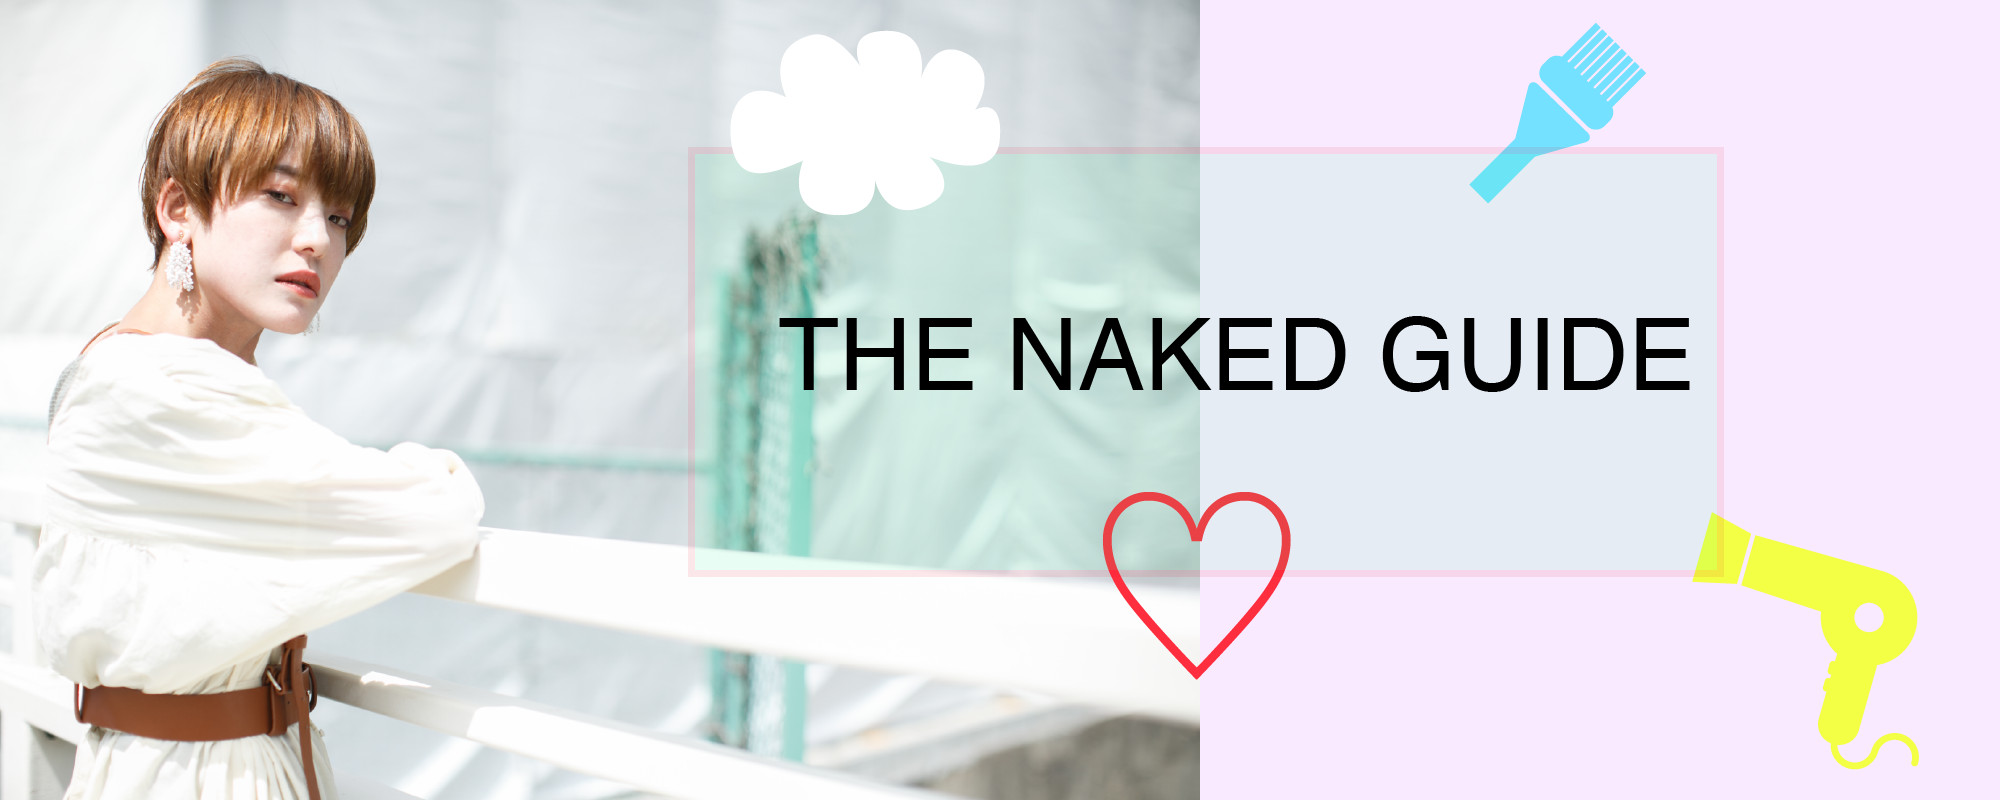 THE NAKED GUIDE